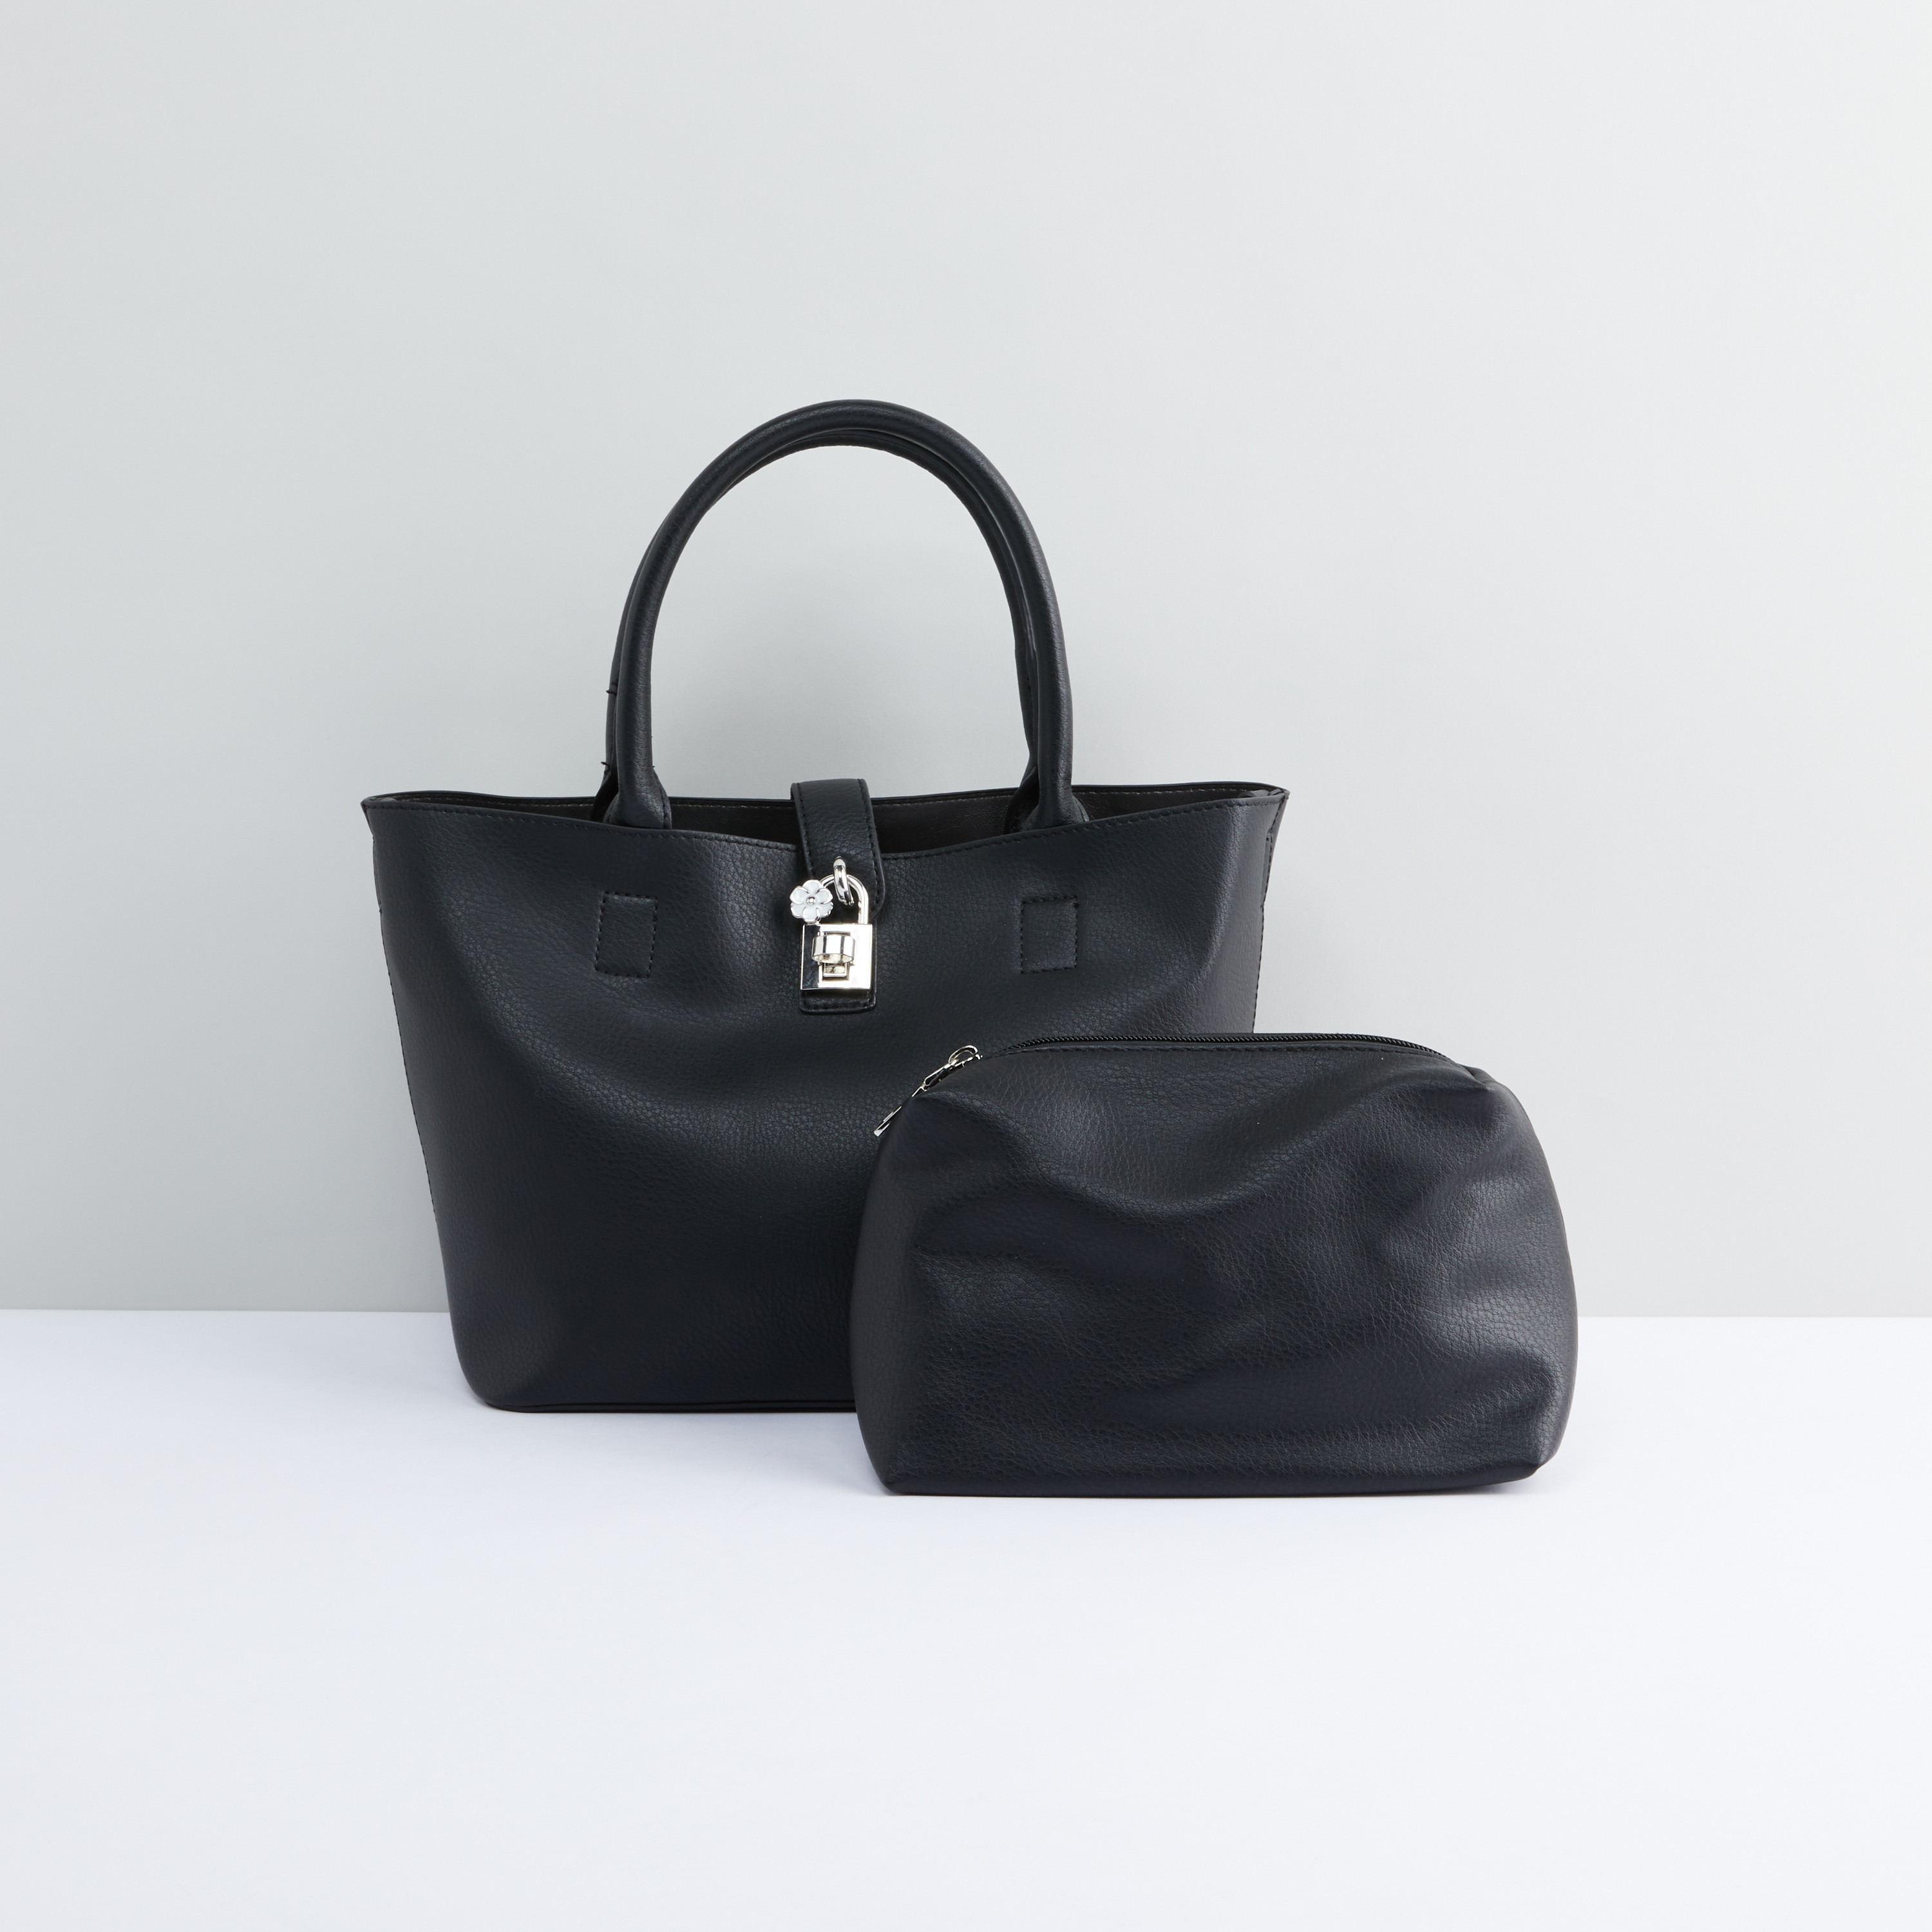 Max Mara bags for women's | Shop online at THEBS